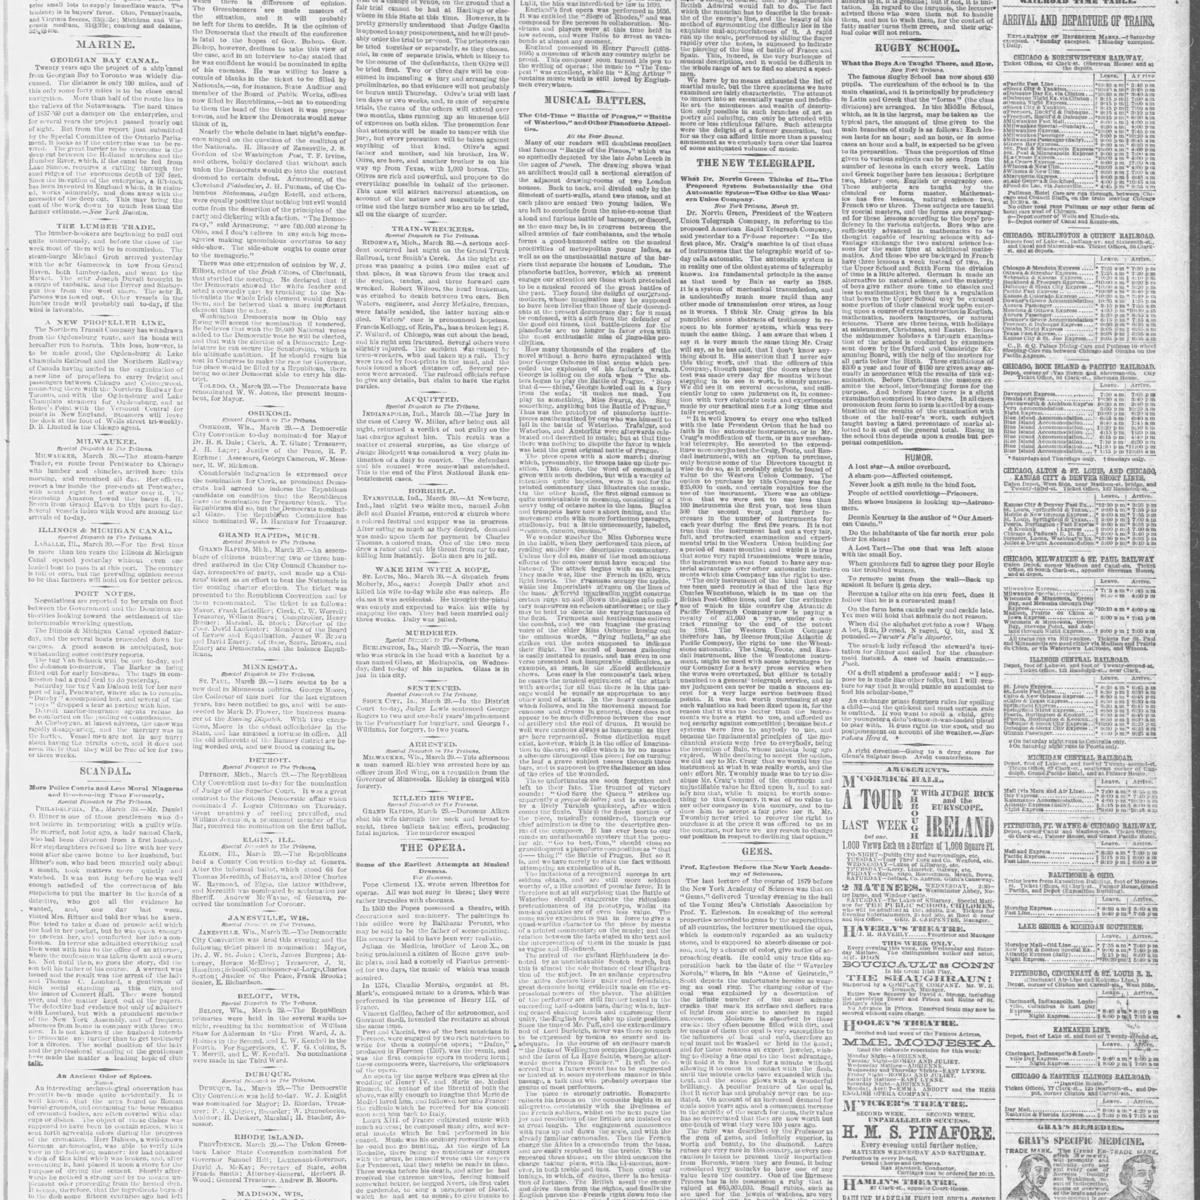 The Chicago Tribune, 1879-03-31, page 7